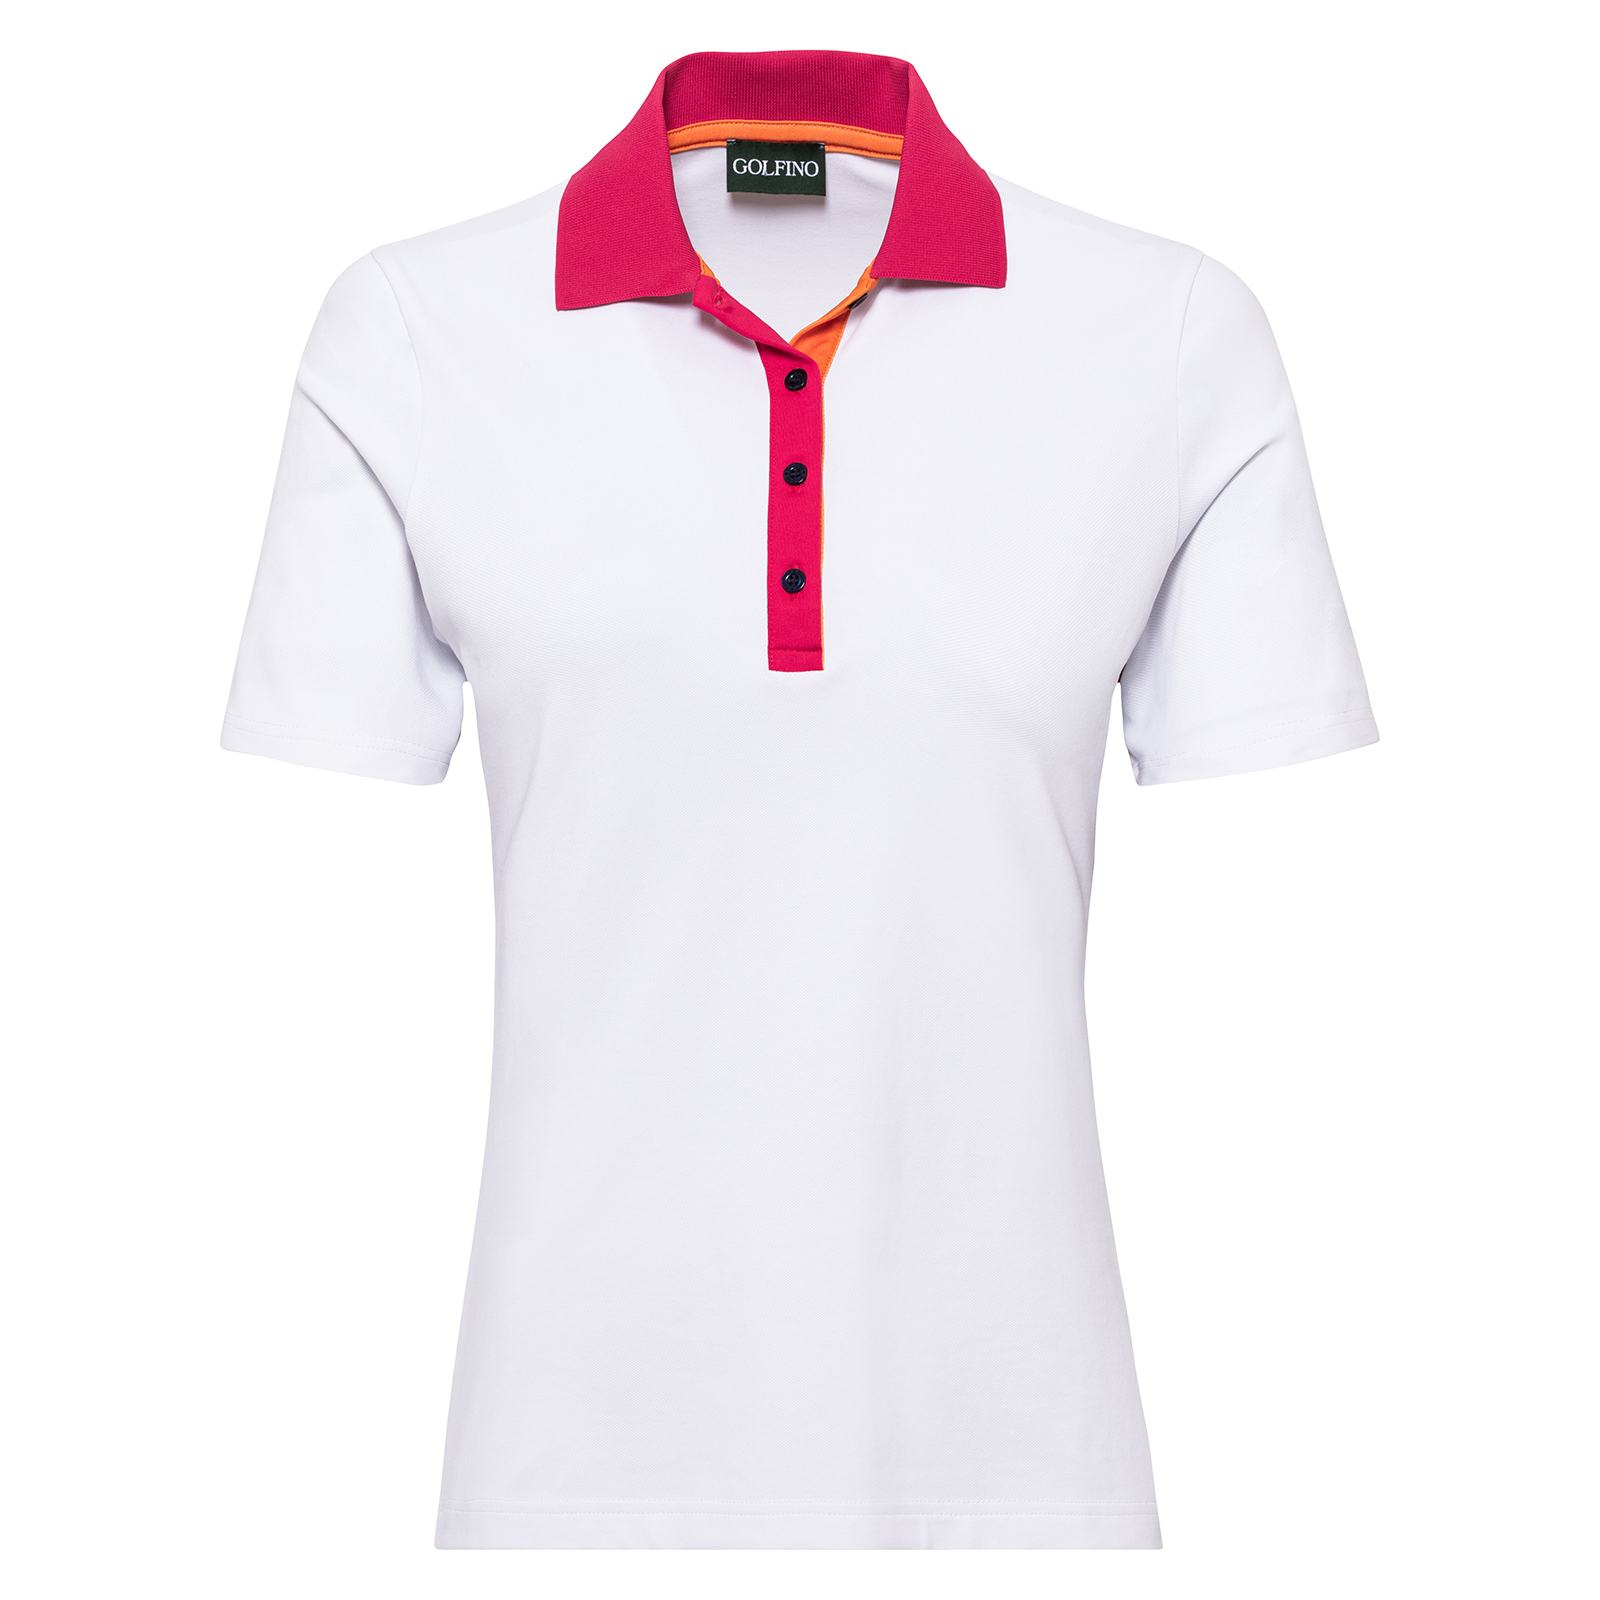 Ladies' golf polo shirt with ultraviolet protection 